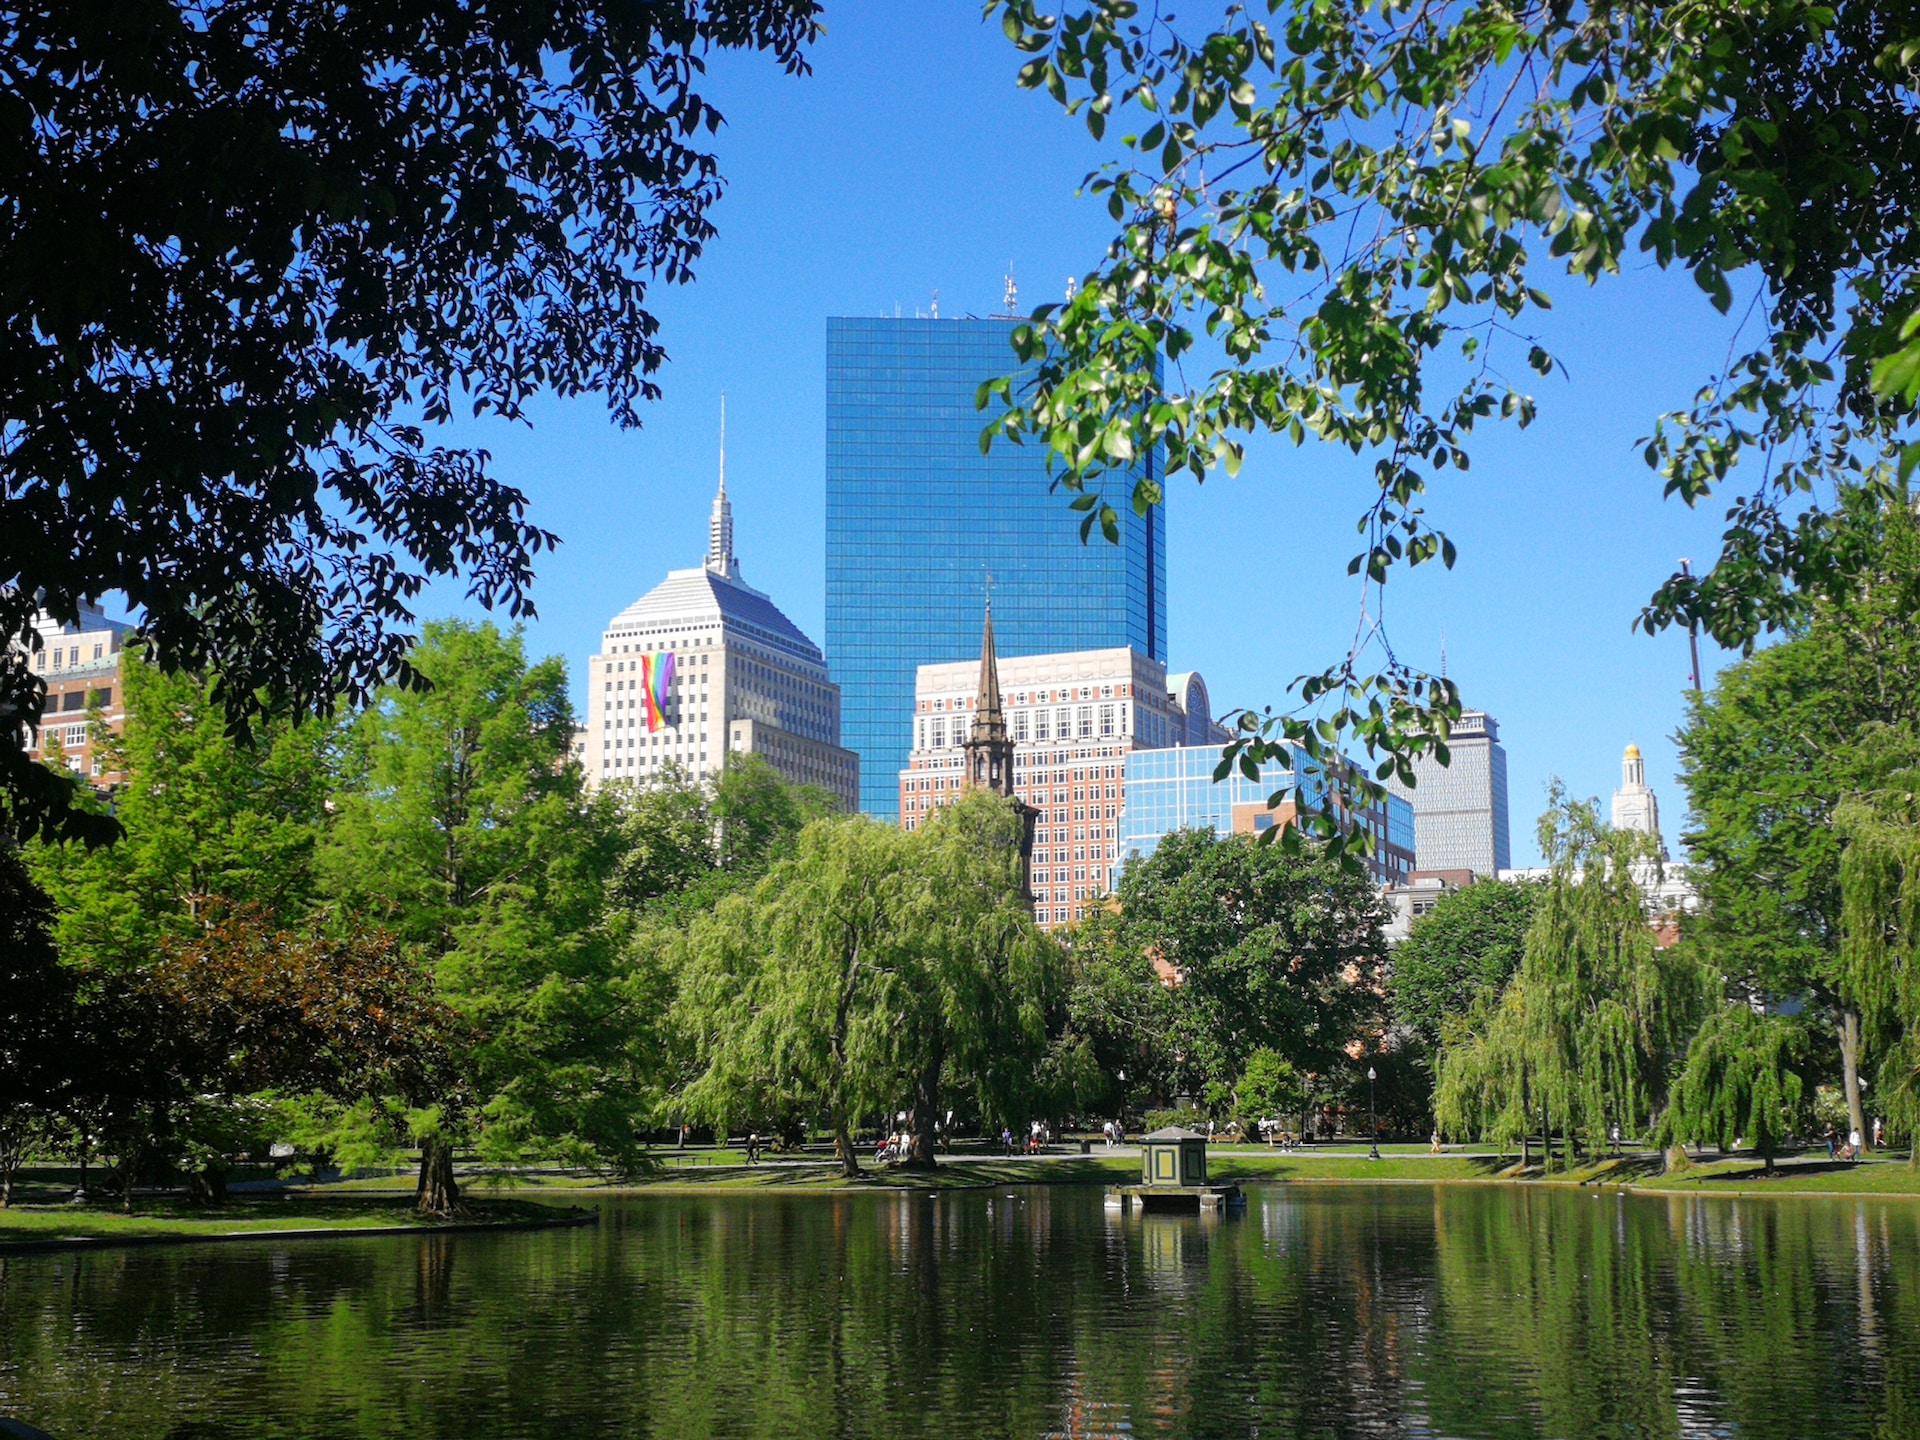 A lake in the Boston Common in the summer.